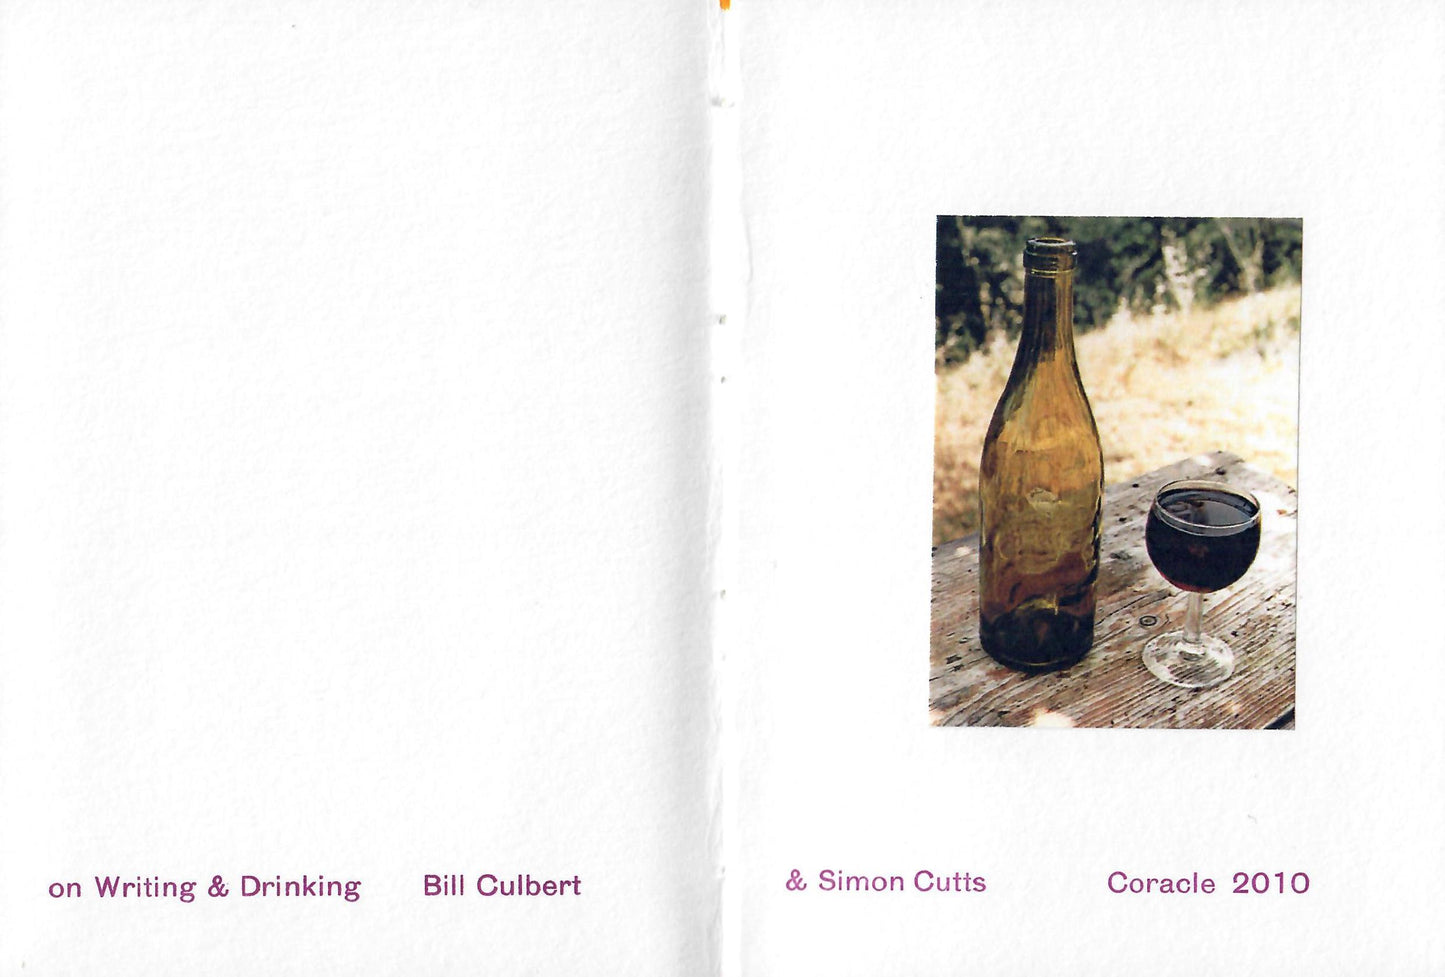 Bill Culbert & Simon Cutts - Some more notes on writing & drinking